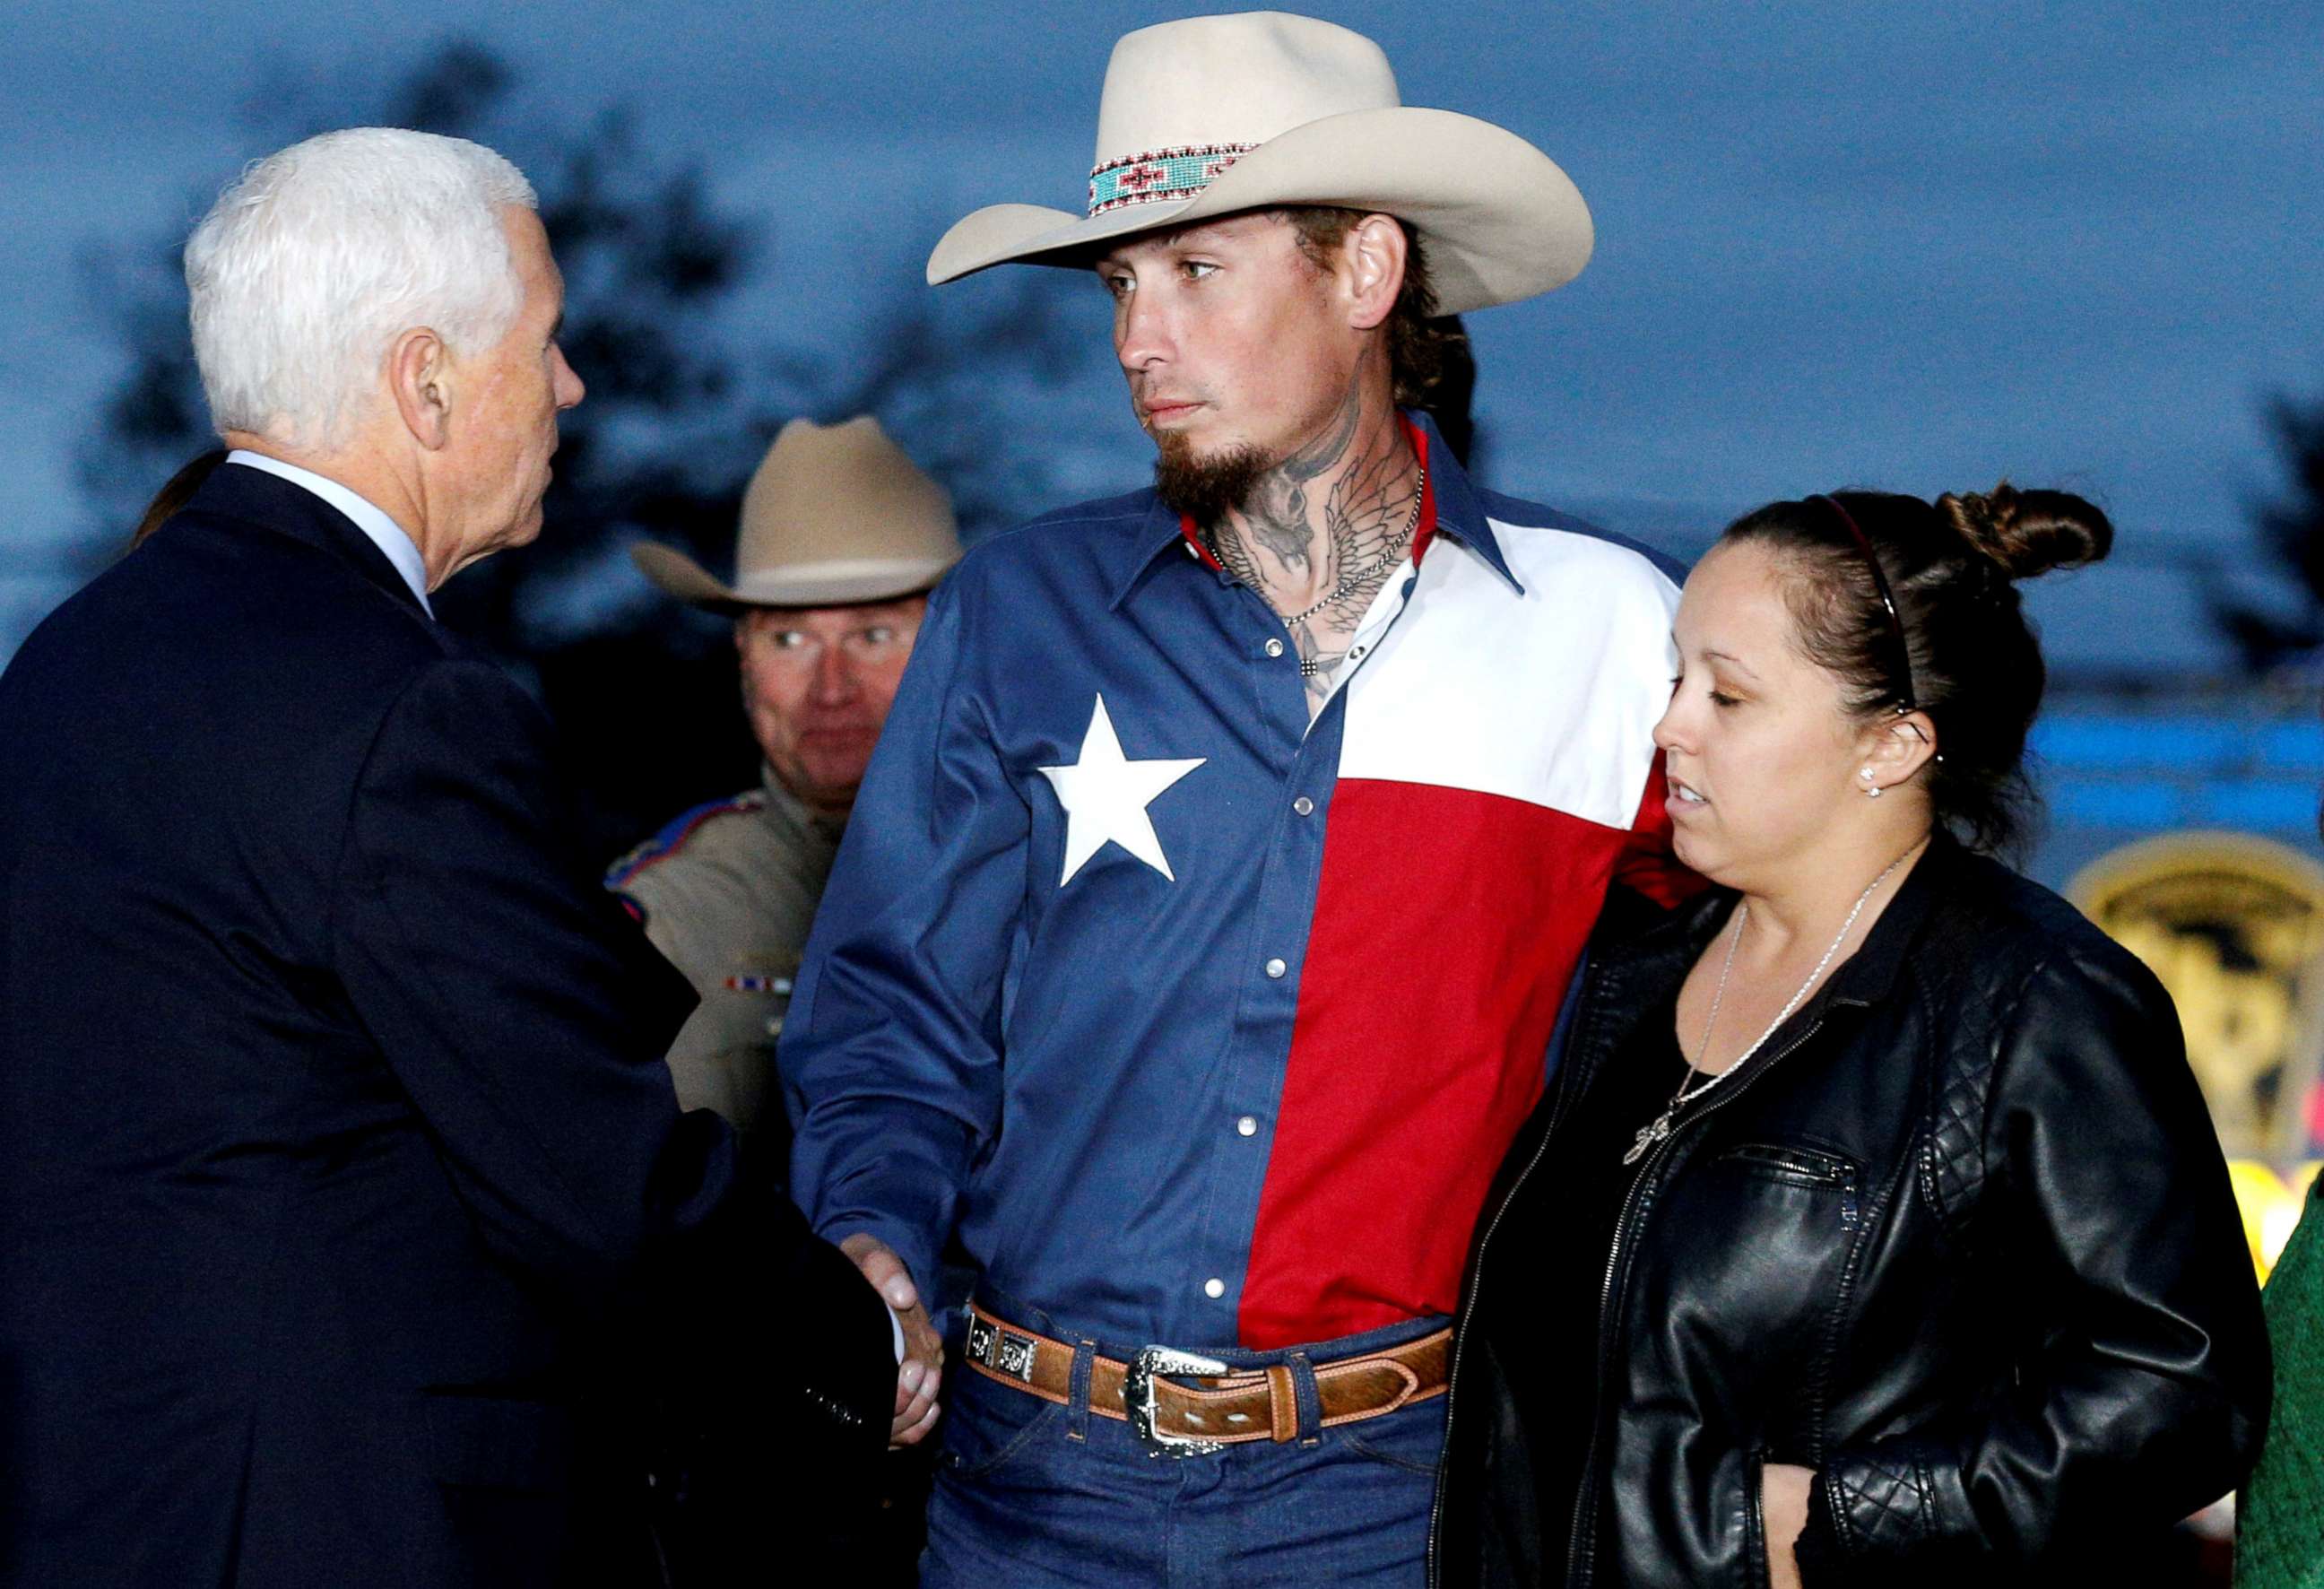 PHOTO: Vice President Mike Pence shakes hands with Johnnie Langendorff, who was one of the heroes that chased the assailant, near the site of the shooting at the First Baptist Church of Sutherland Springs in Sutherland Springs, Texas, Nov. 8, 2017.